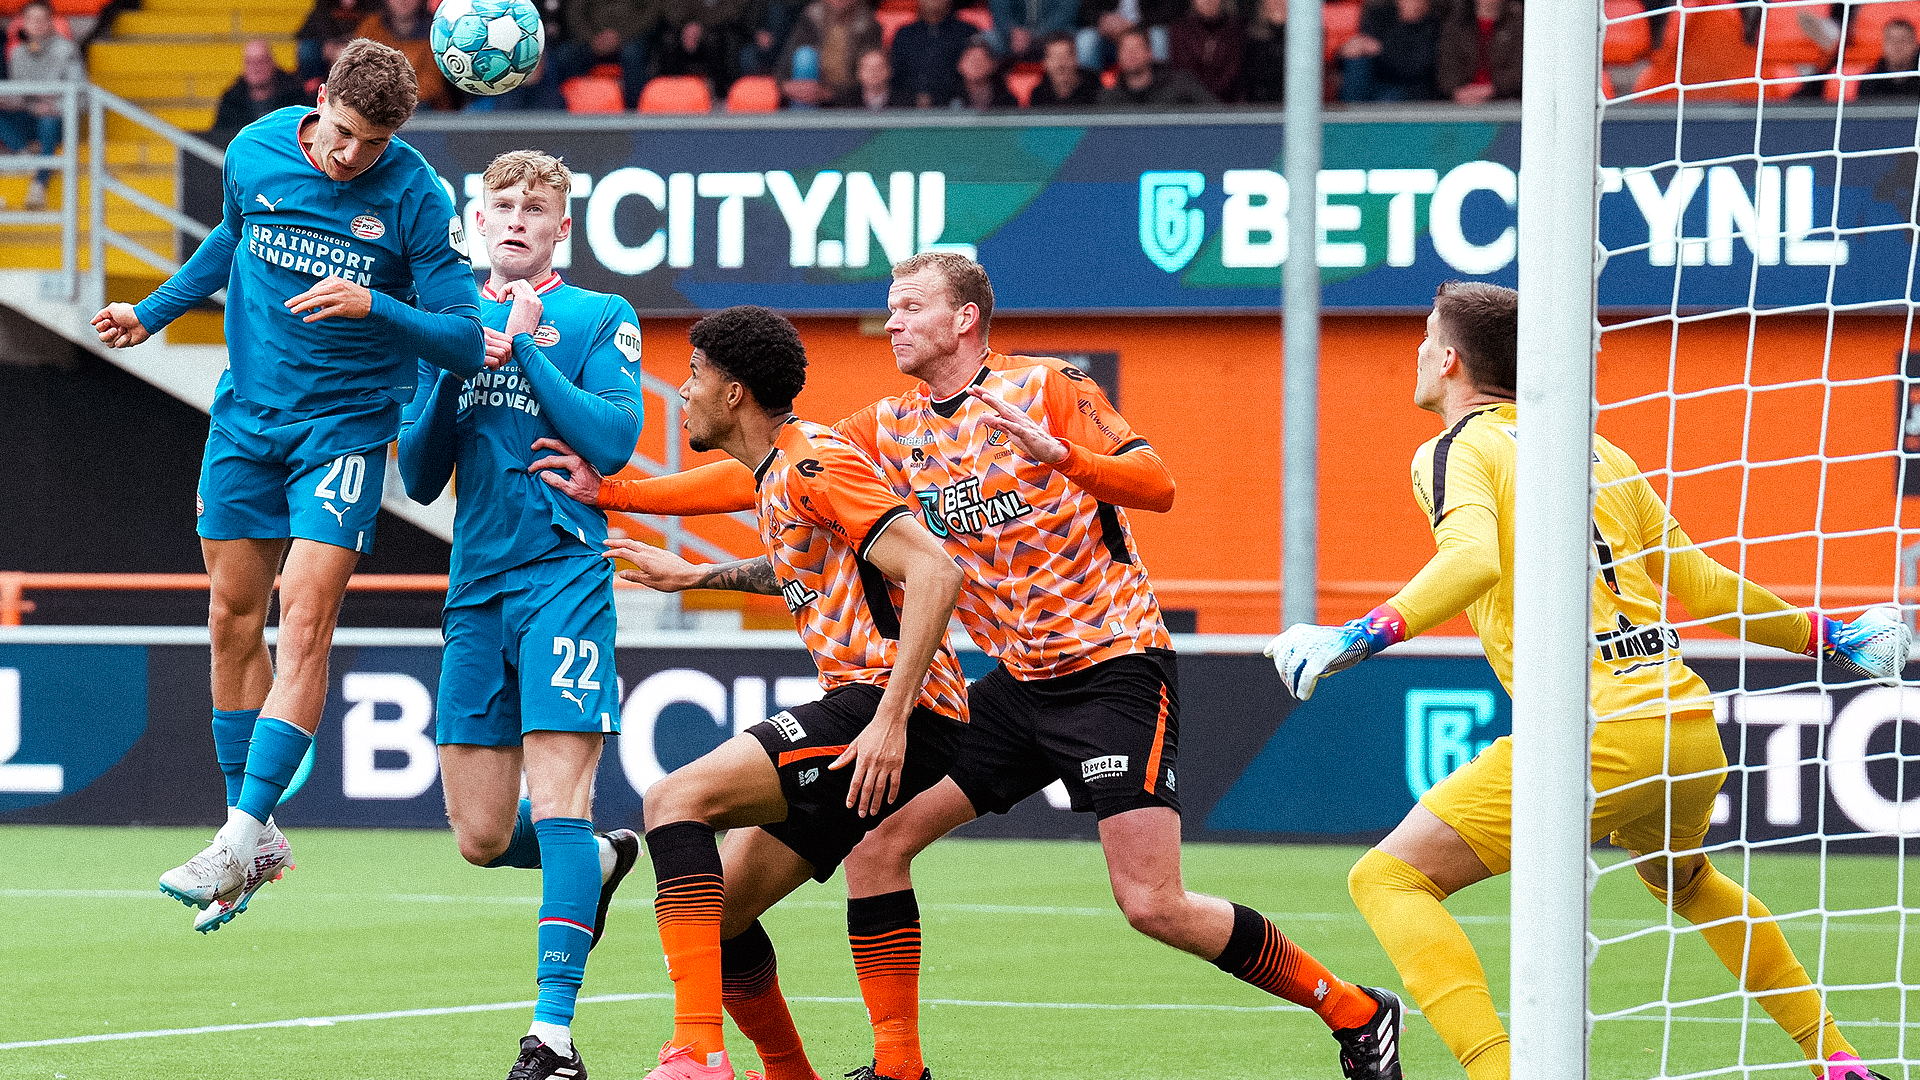 Last season, this Eredivisie affair ended in a 2-3 win for PSV, with Guus Til involved in all the goals on PSV's side with two goals and one assist.